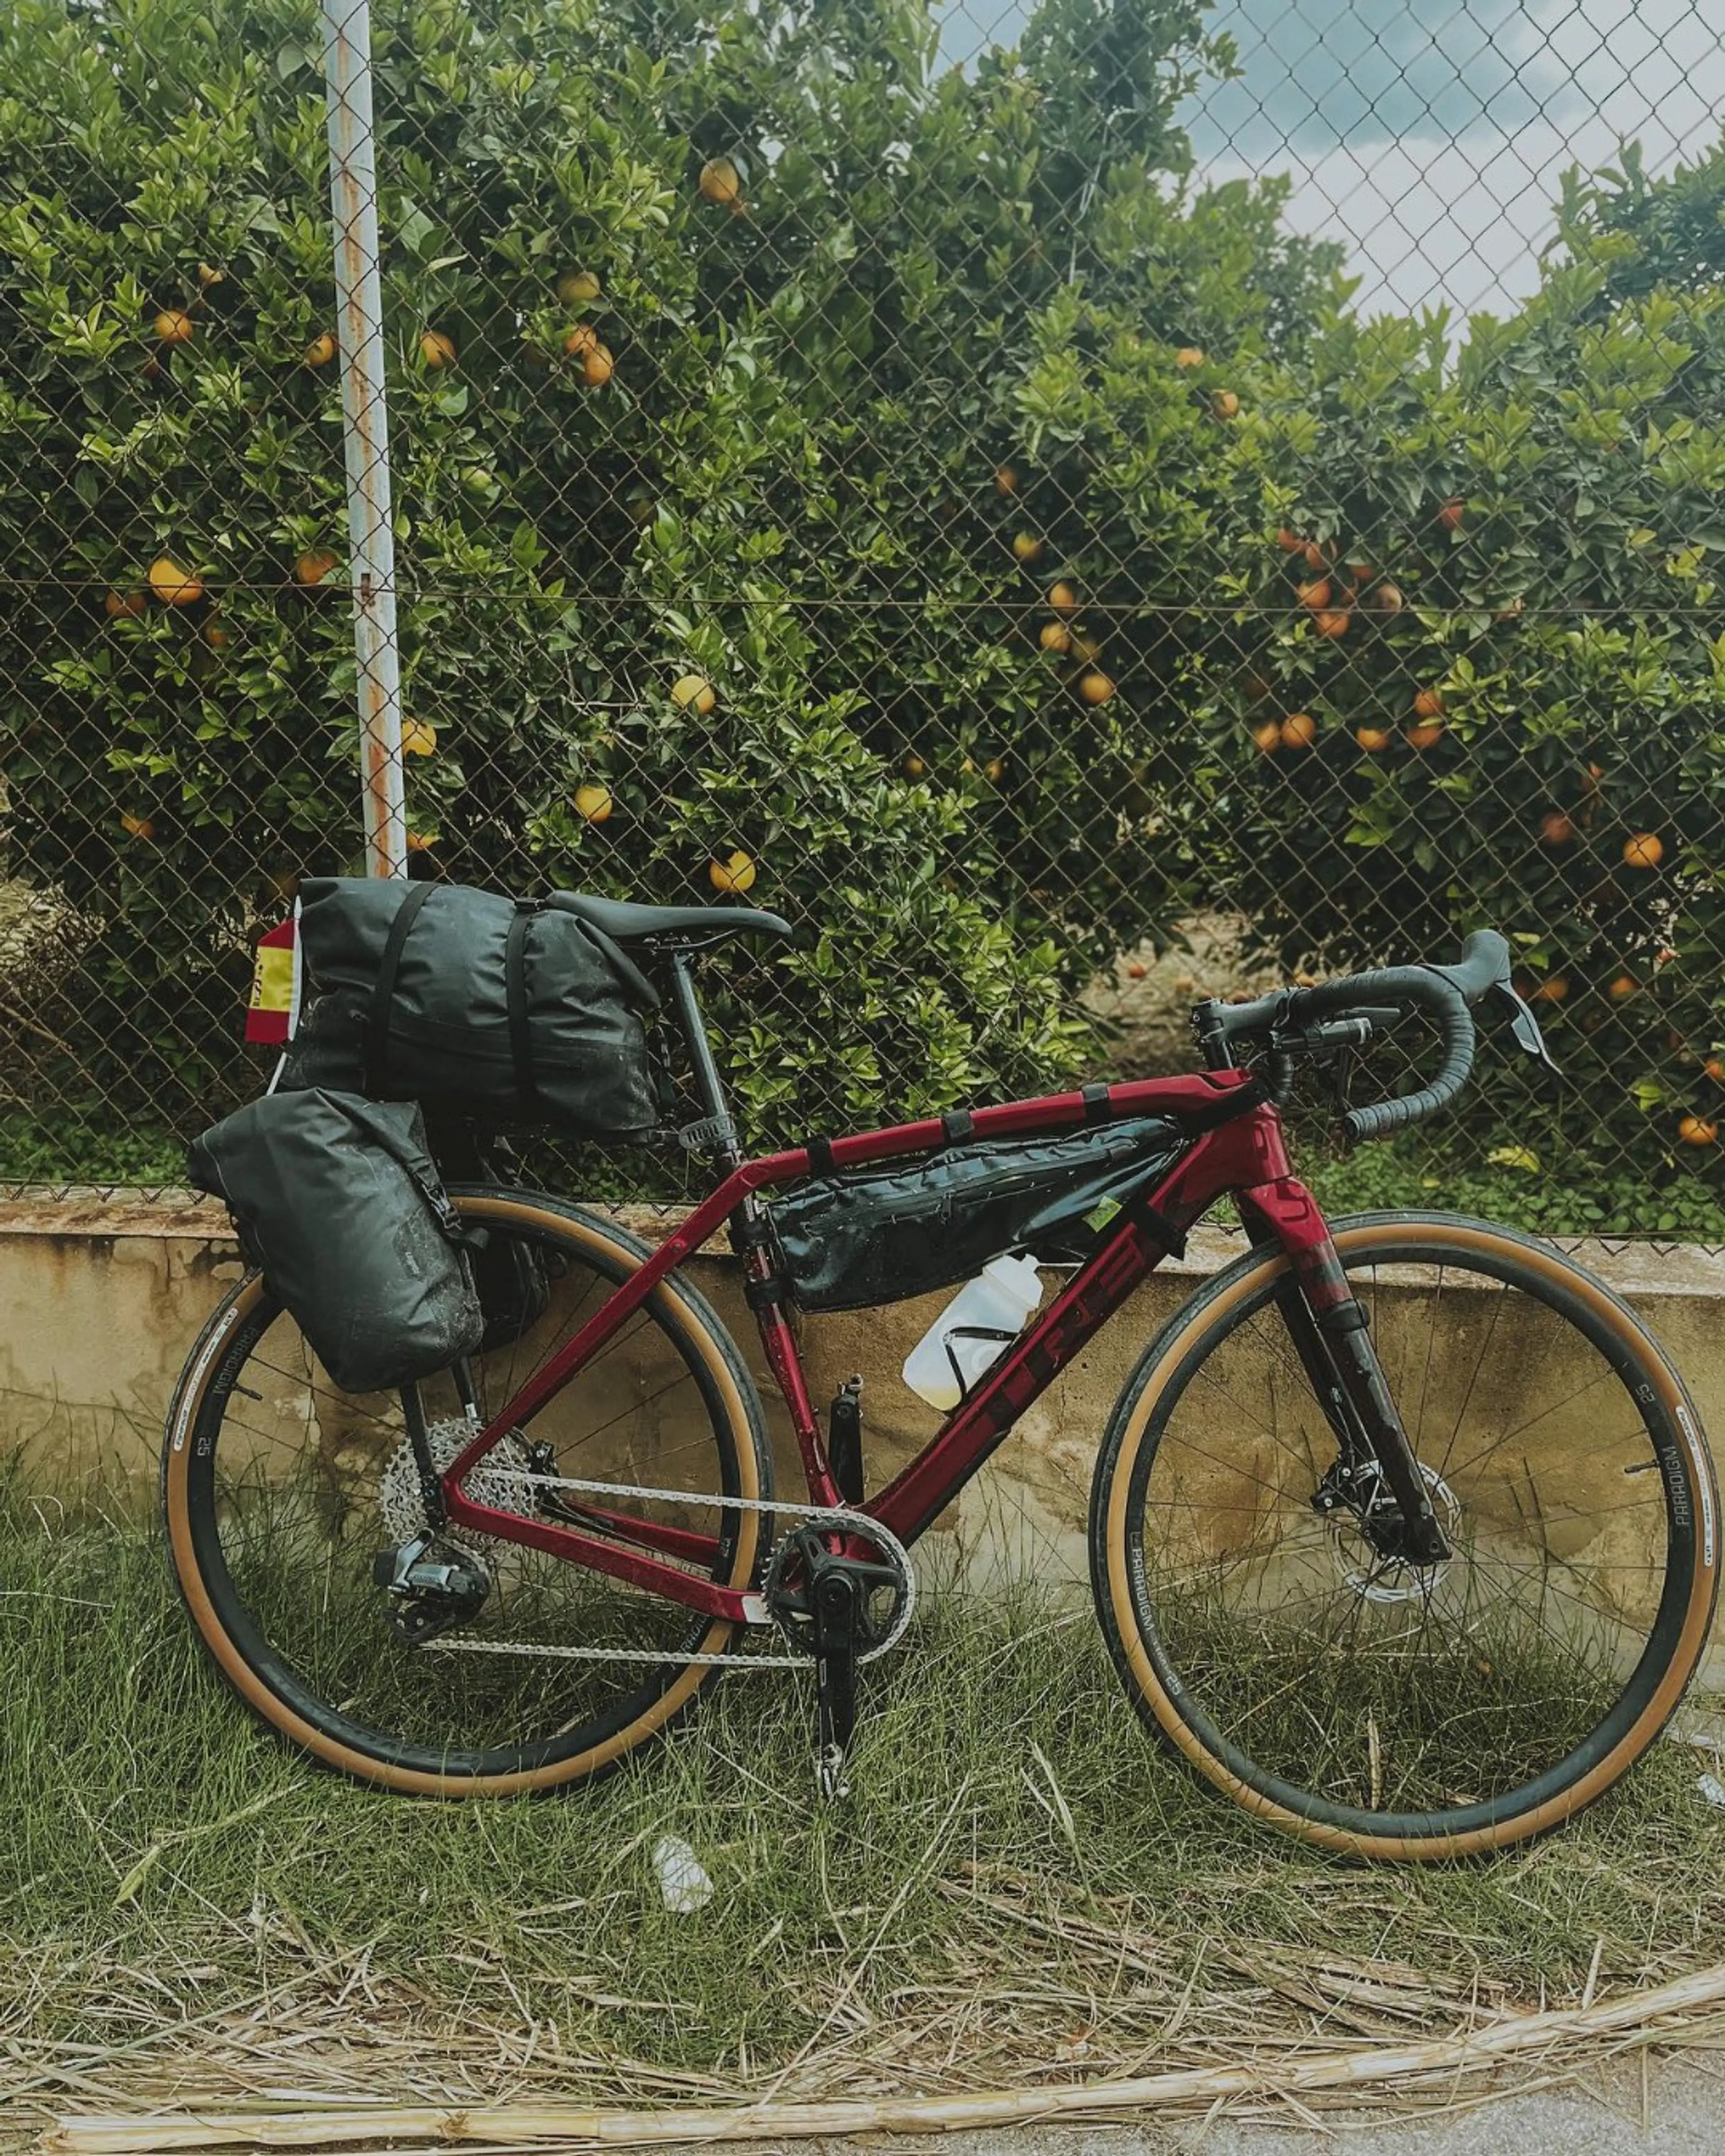 Preparing for a Multi-Day Gravel Cycling Adventure in Vietnam